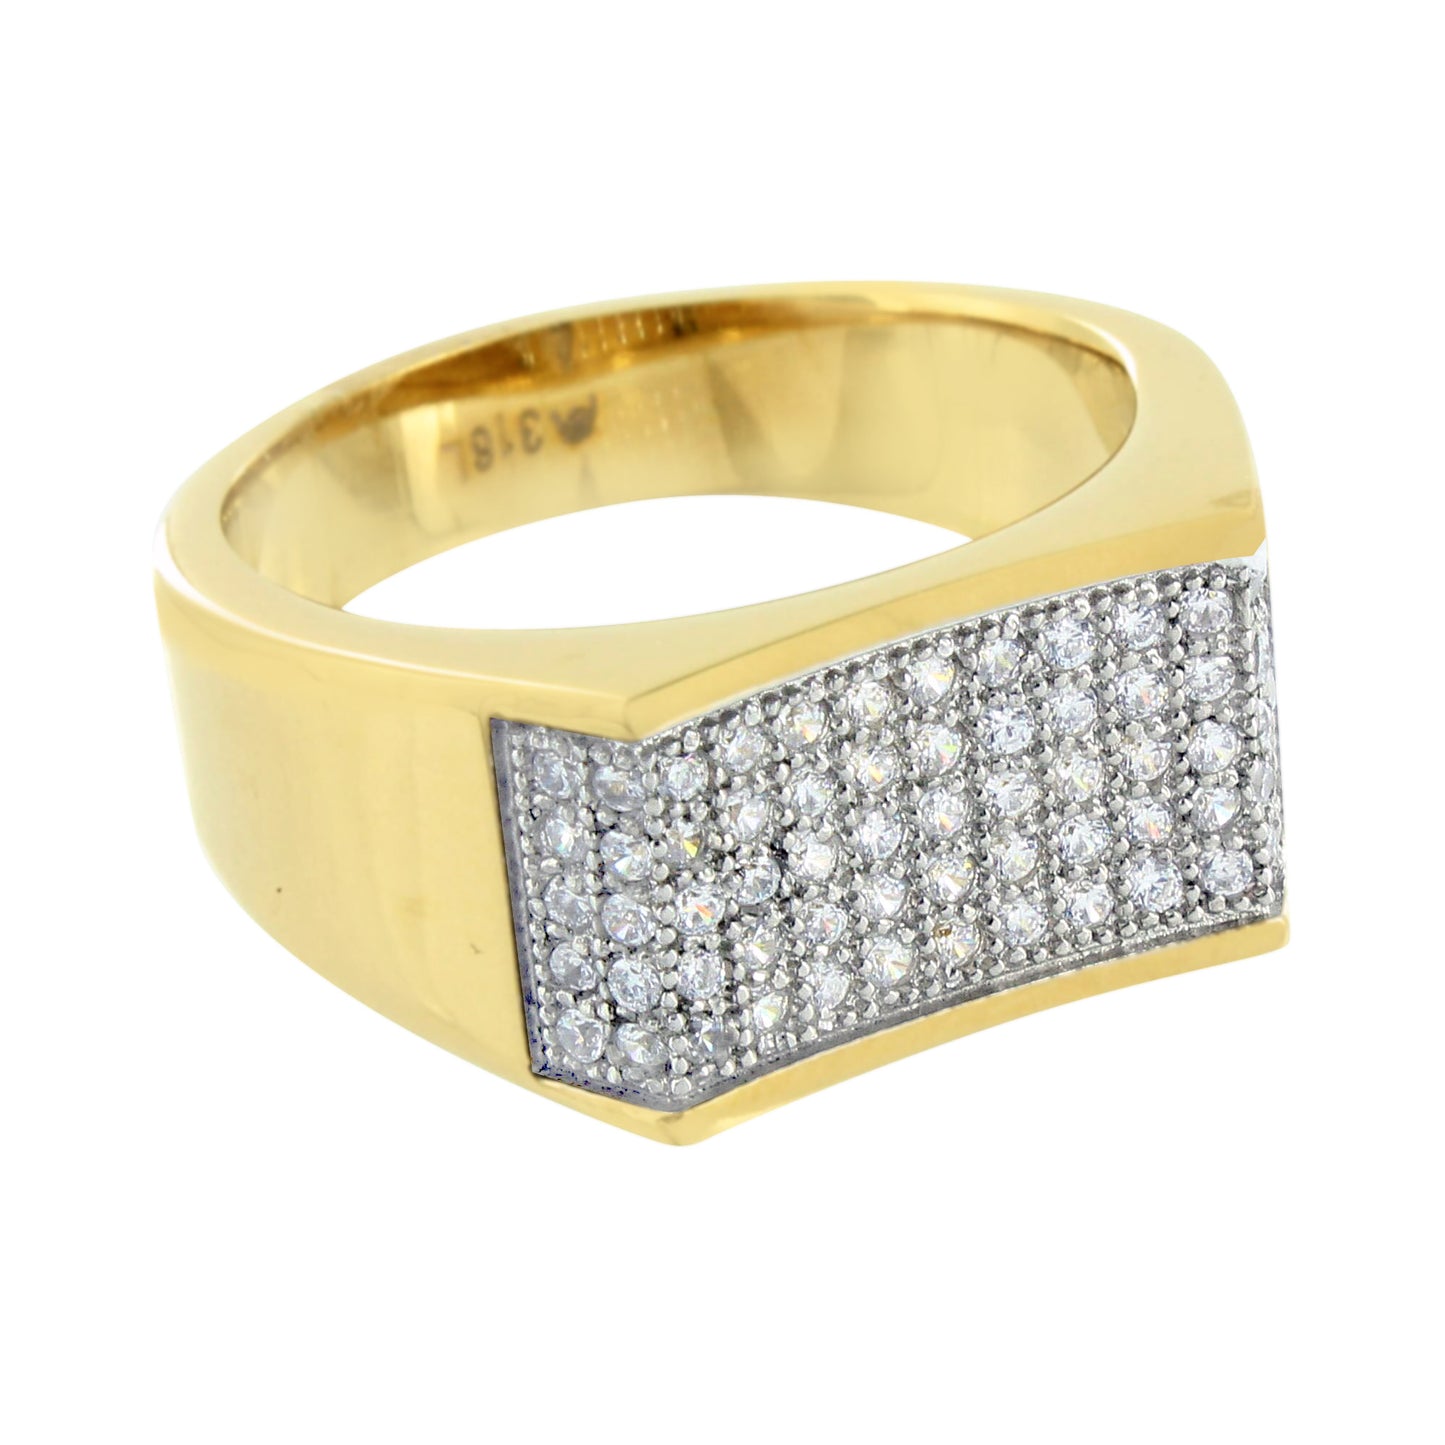 Stainless Steel Mens Ring Gold Finish Simulated Diamonds Engagement Wedding New